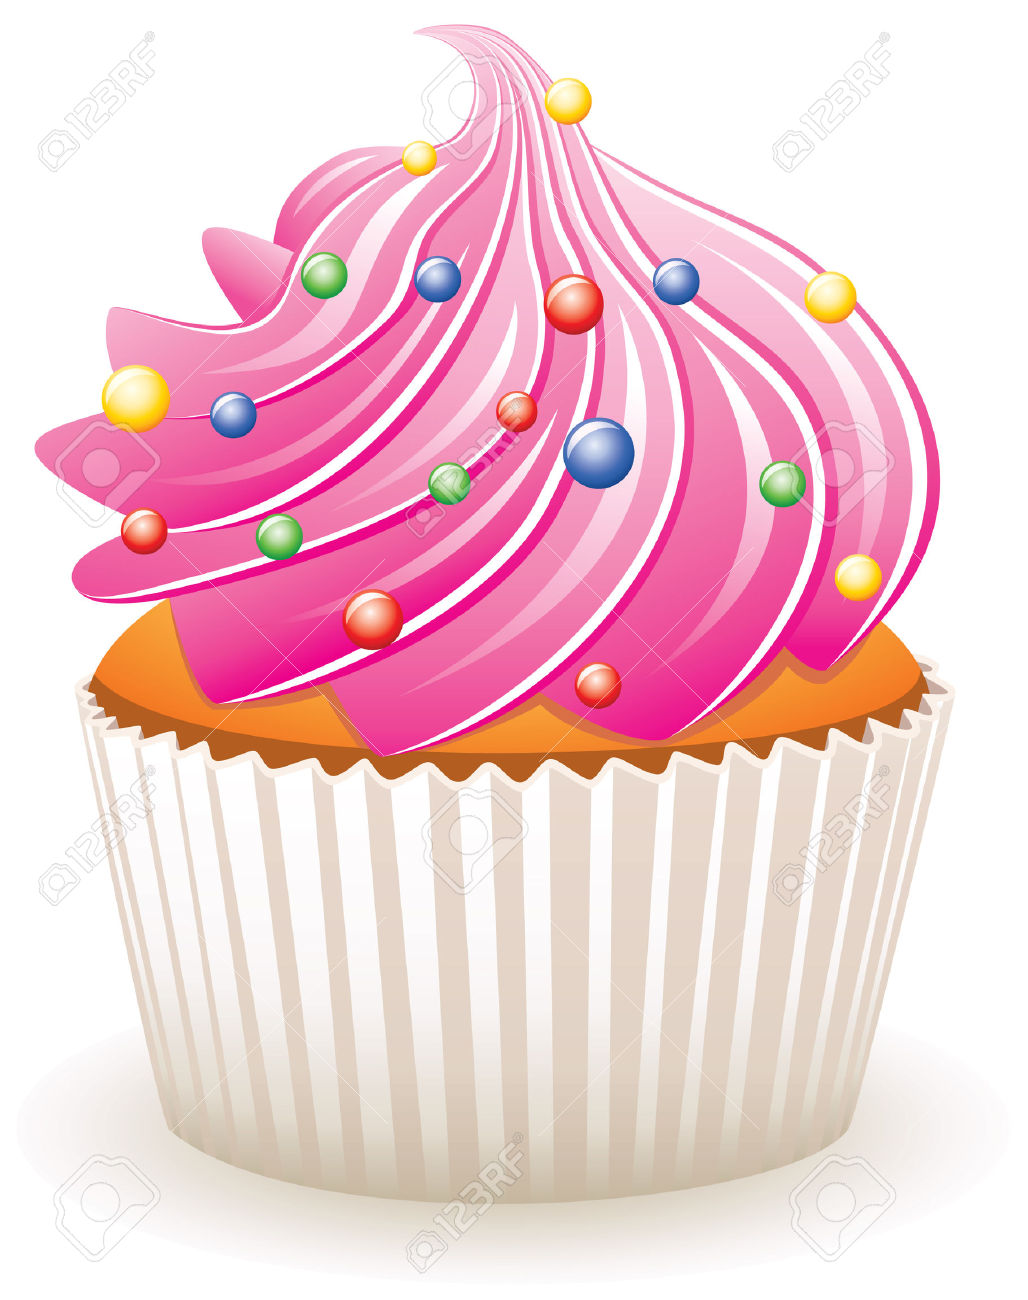 cupcakes clipart sprinkle